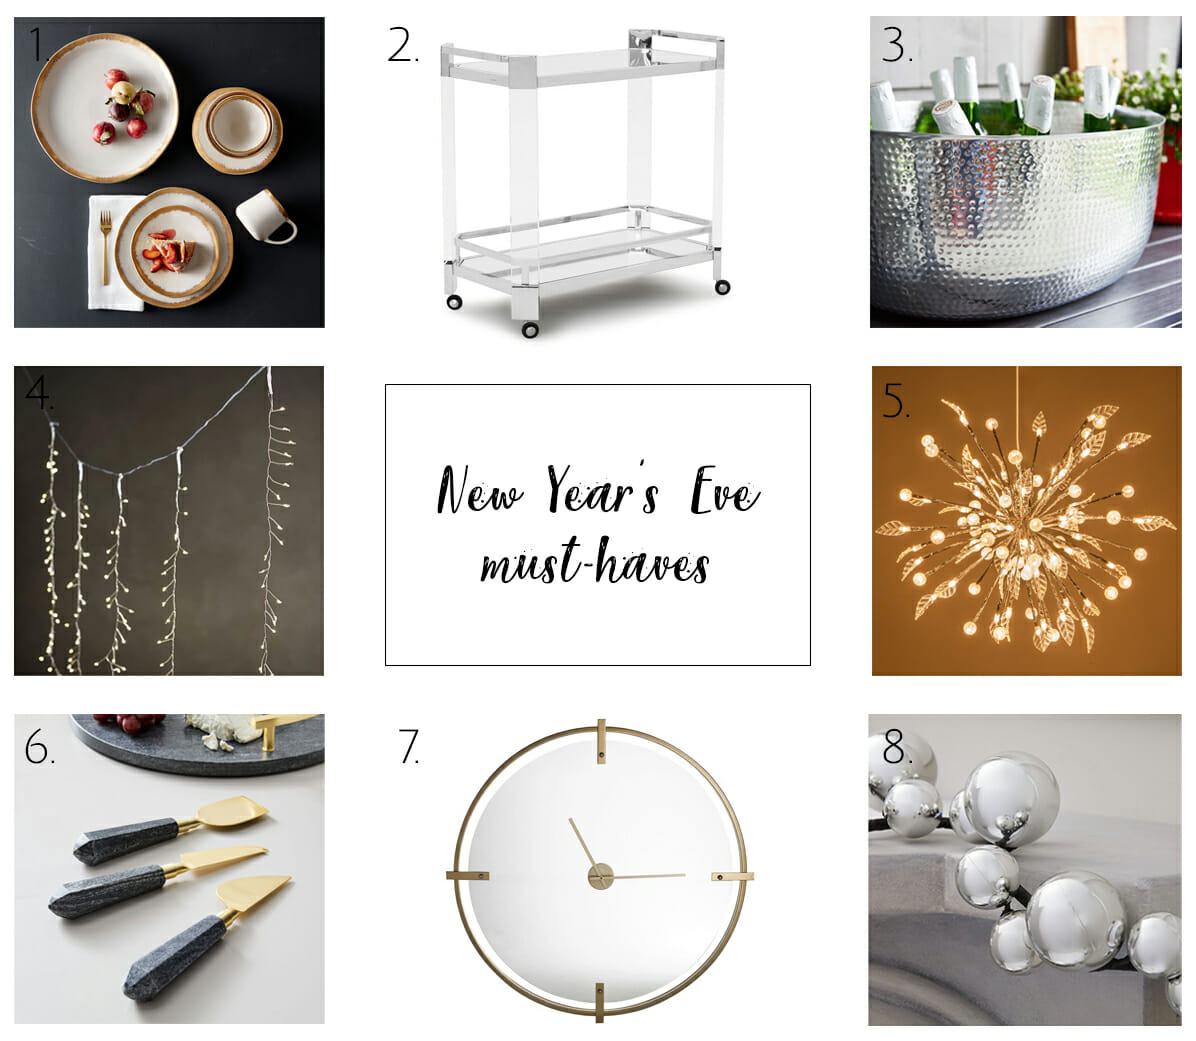 Top picks to decorate for New Year's Eve